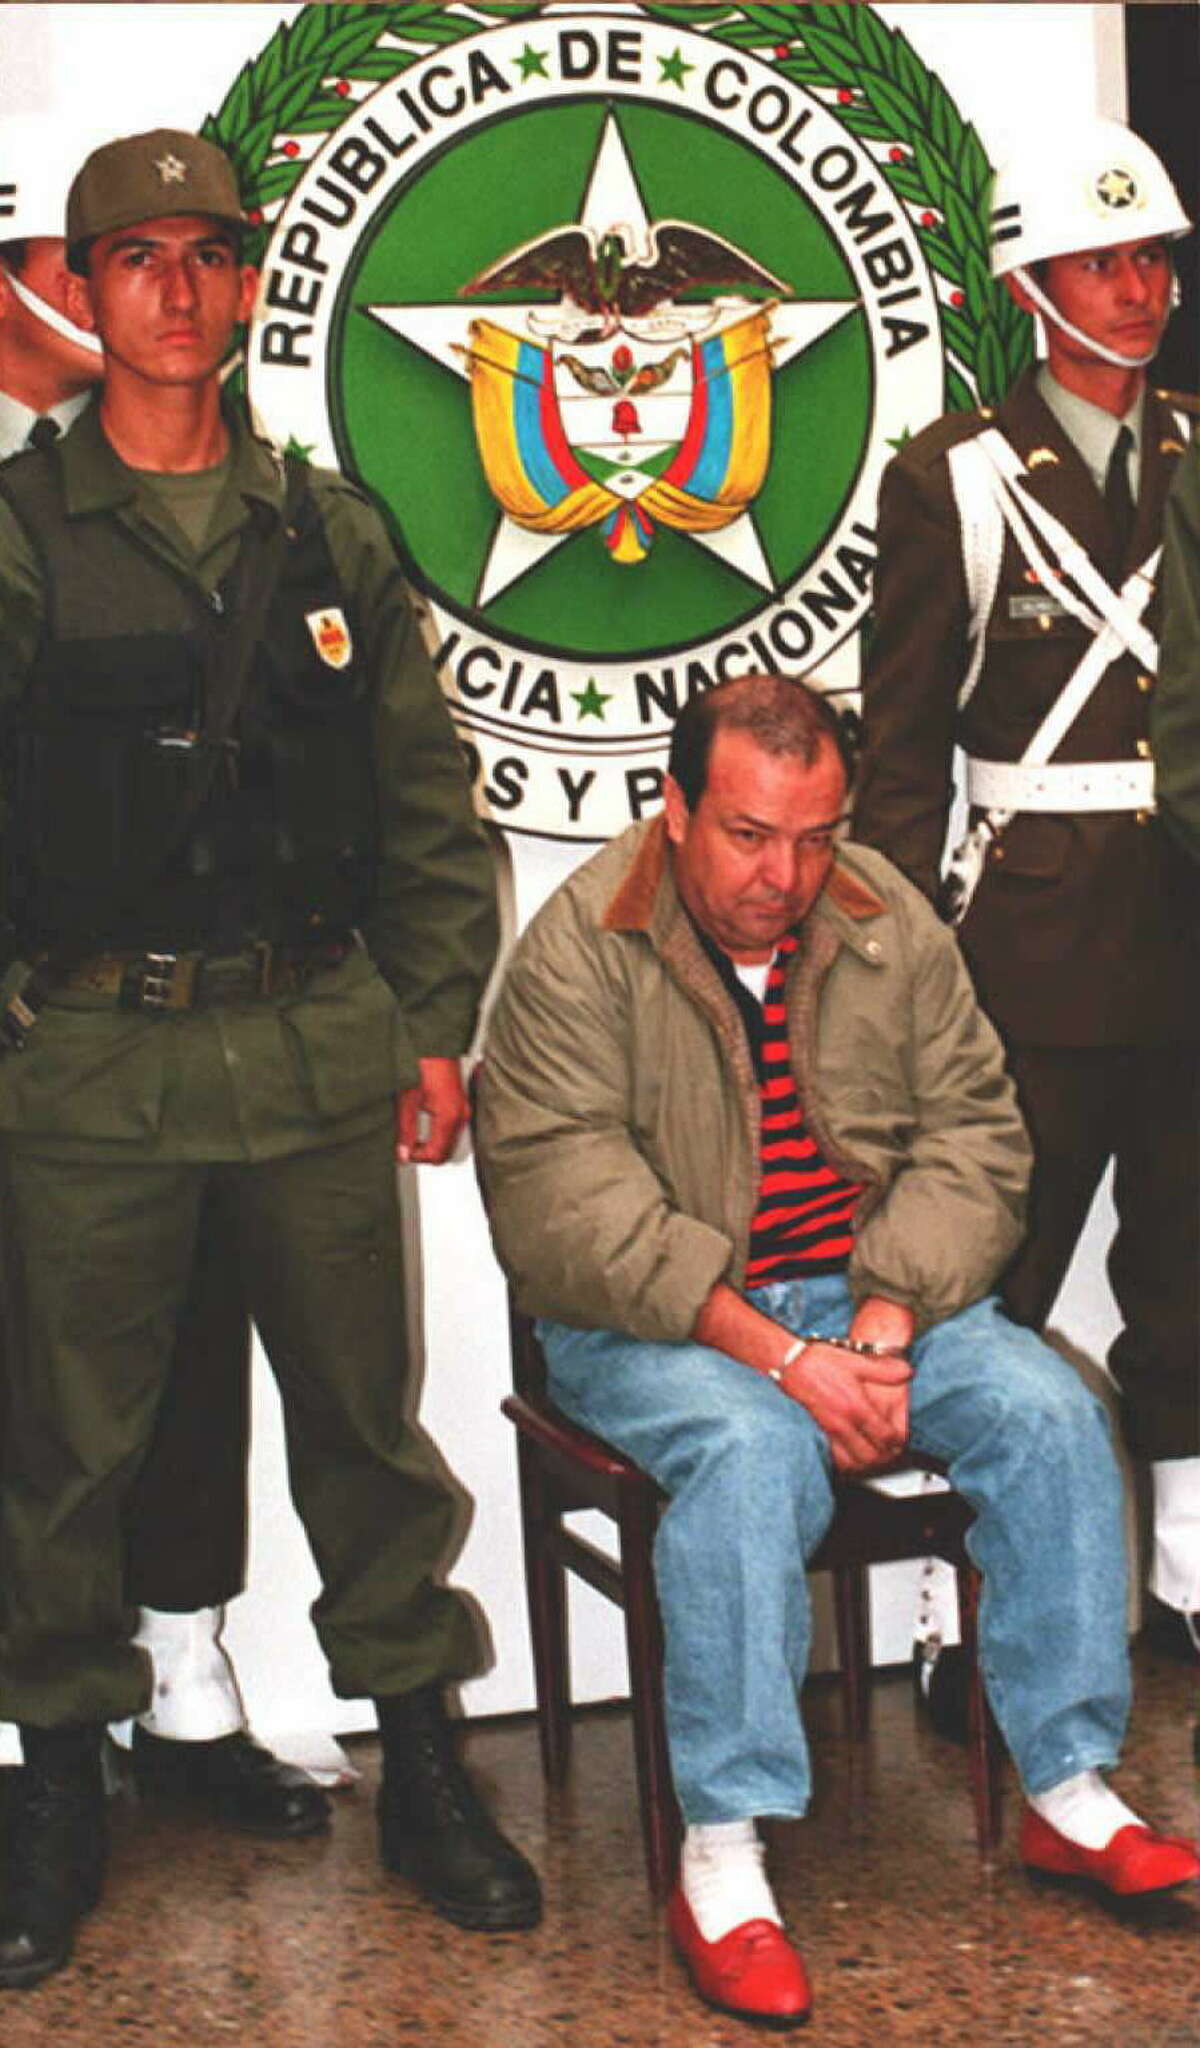 Timeline: Important events in the history of the Cali Cartel